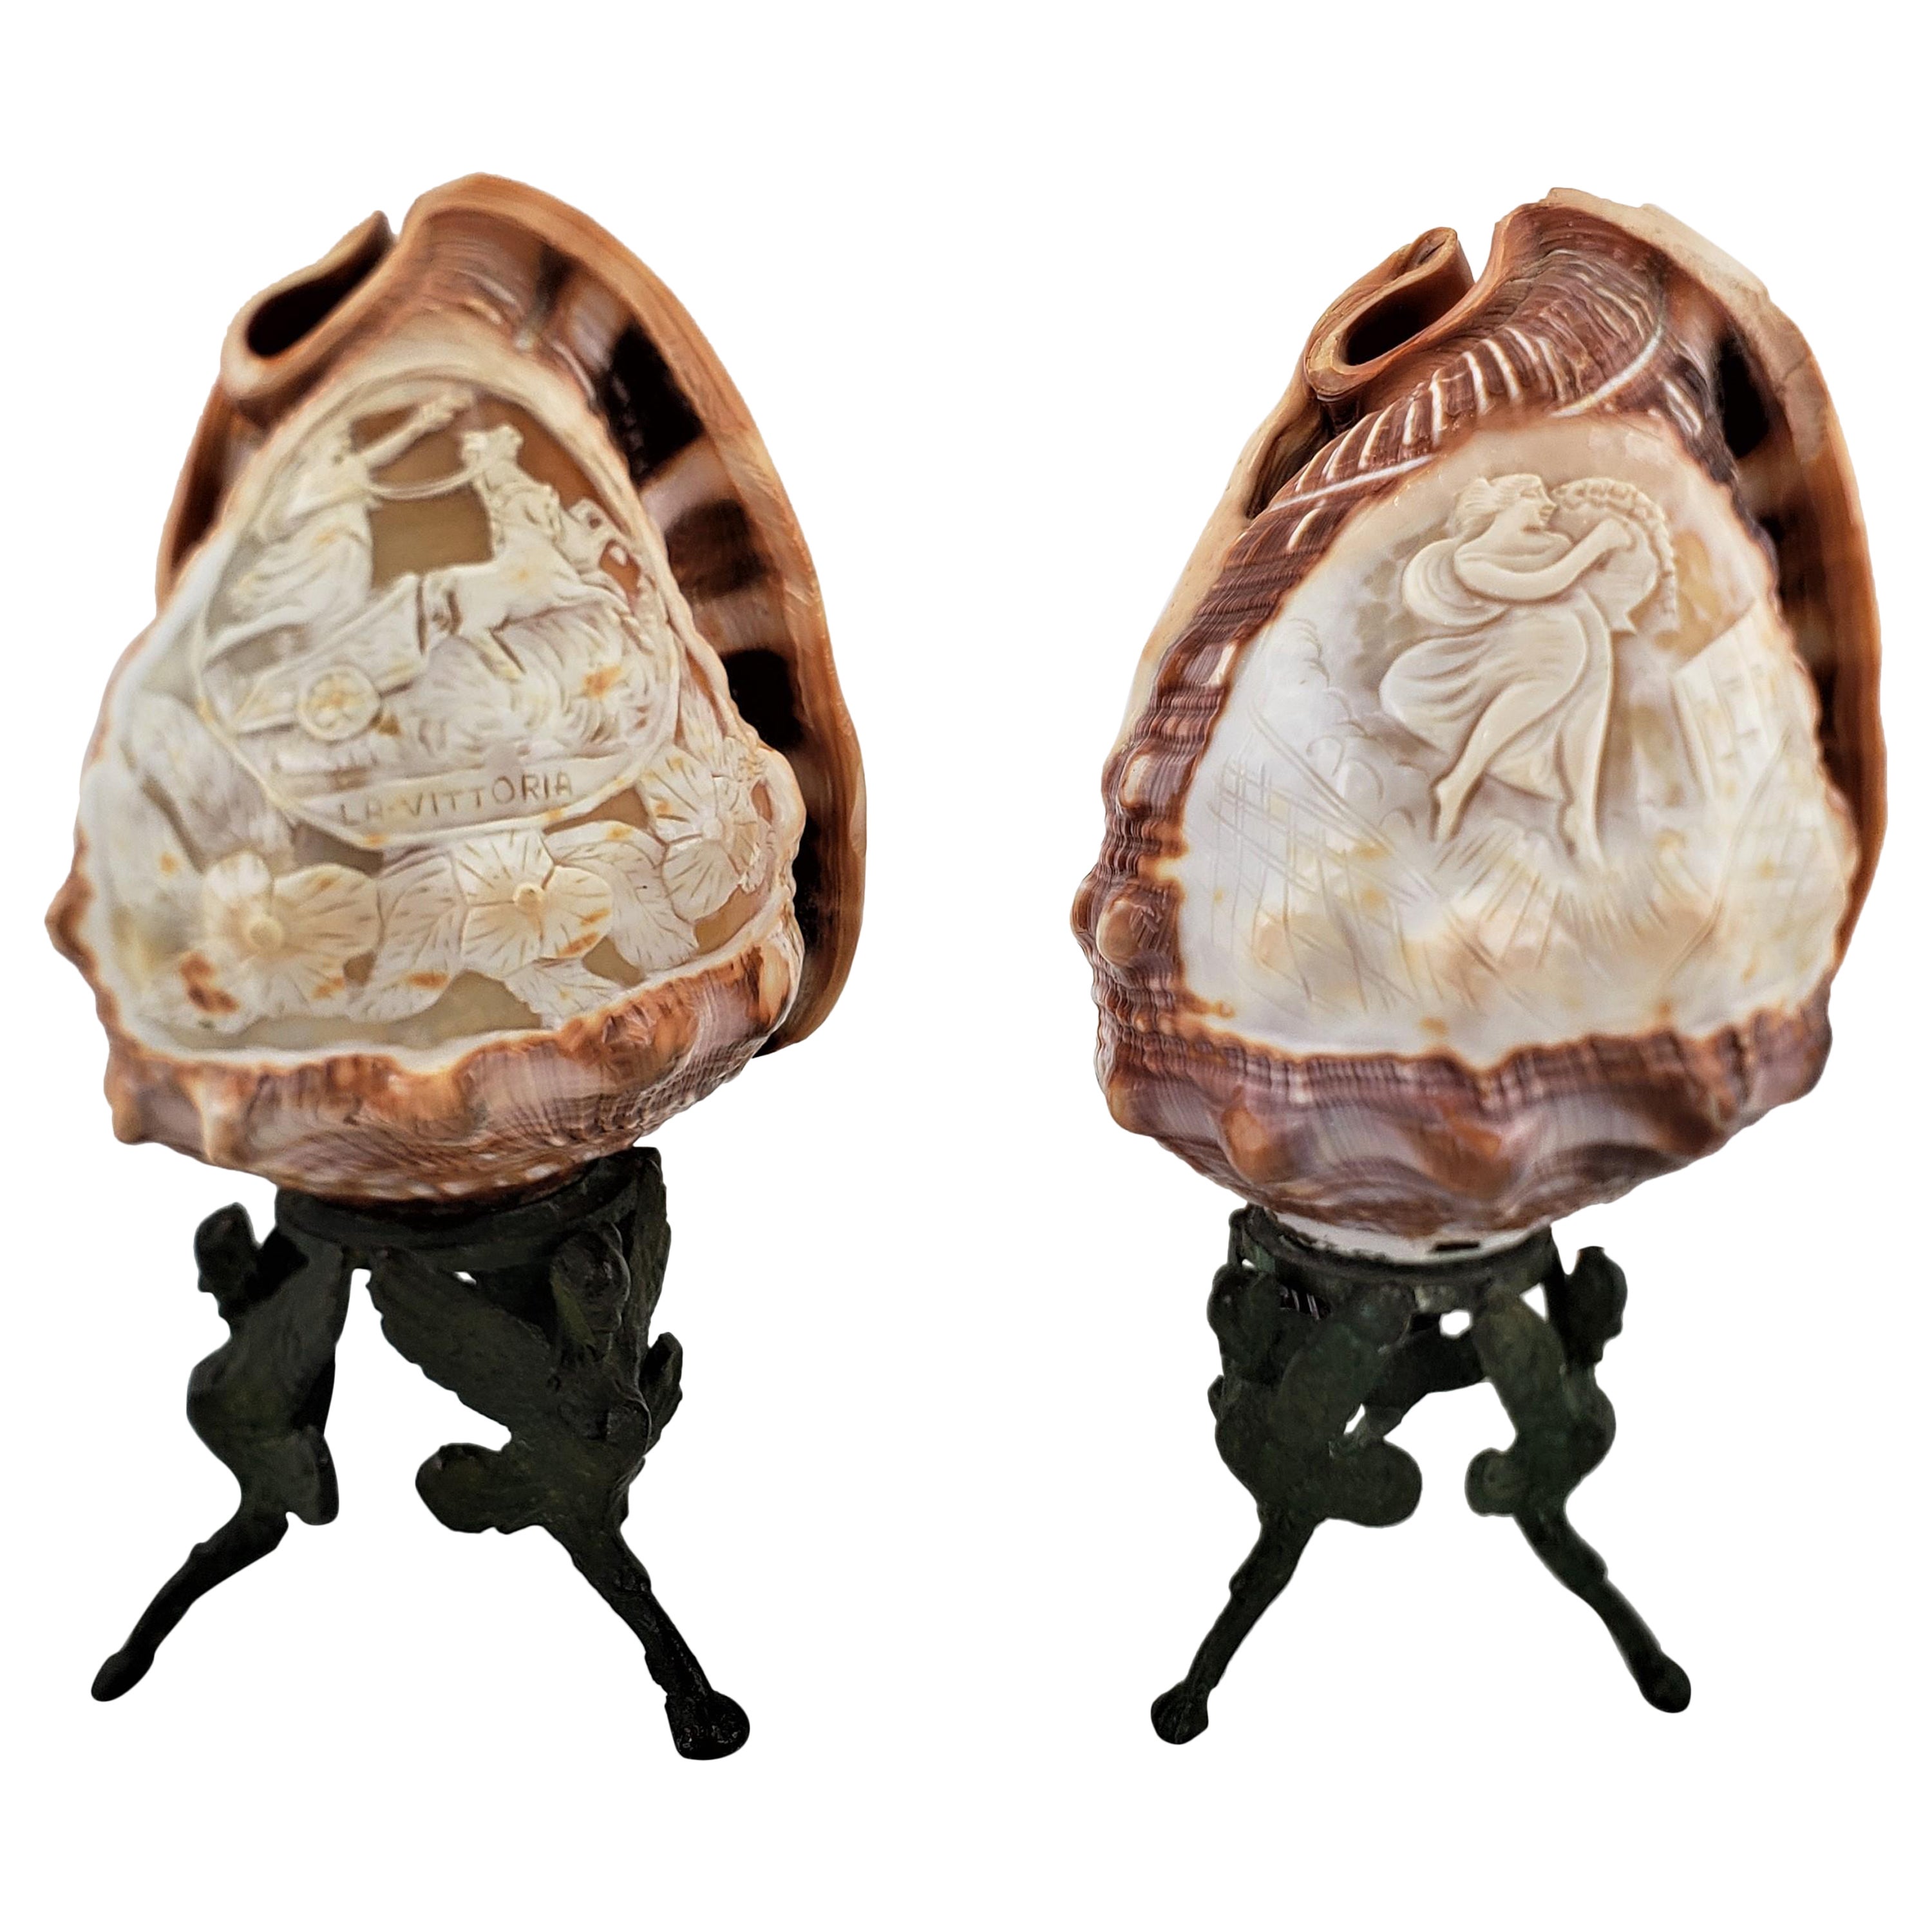 Pair of Antique Carved Conch Shell Accent Table Lamps with Mythological Motif